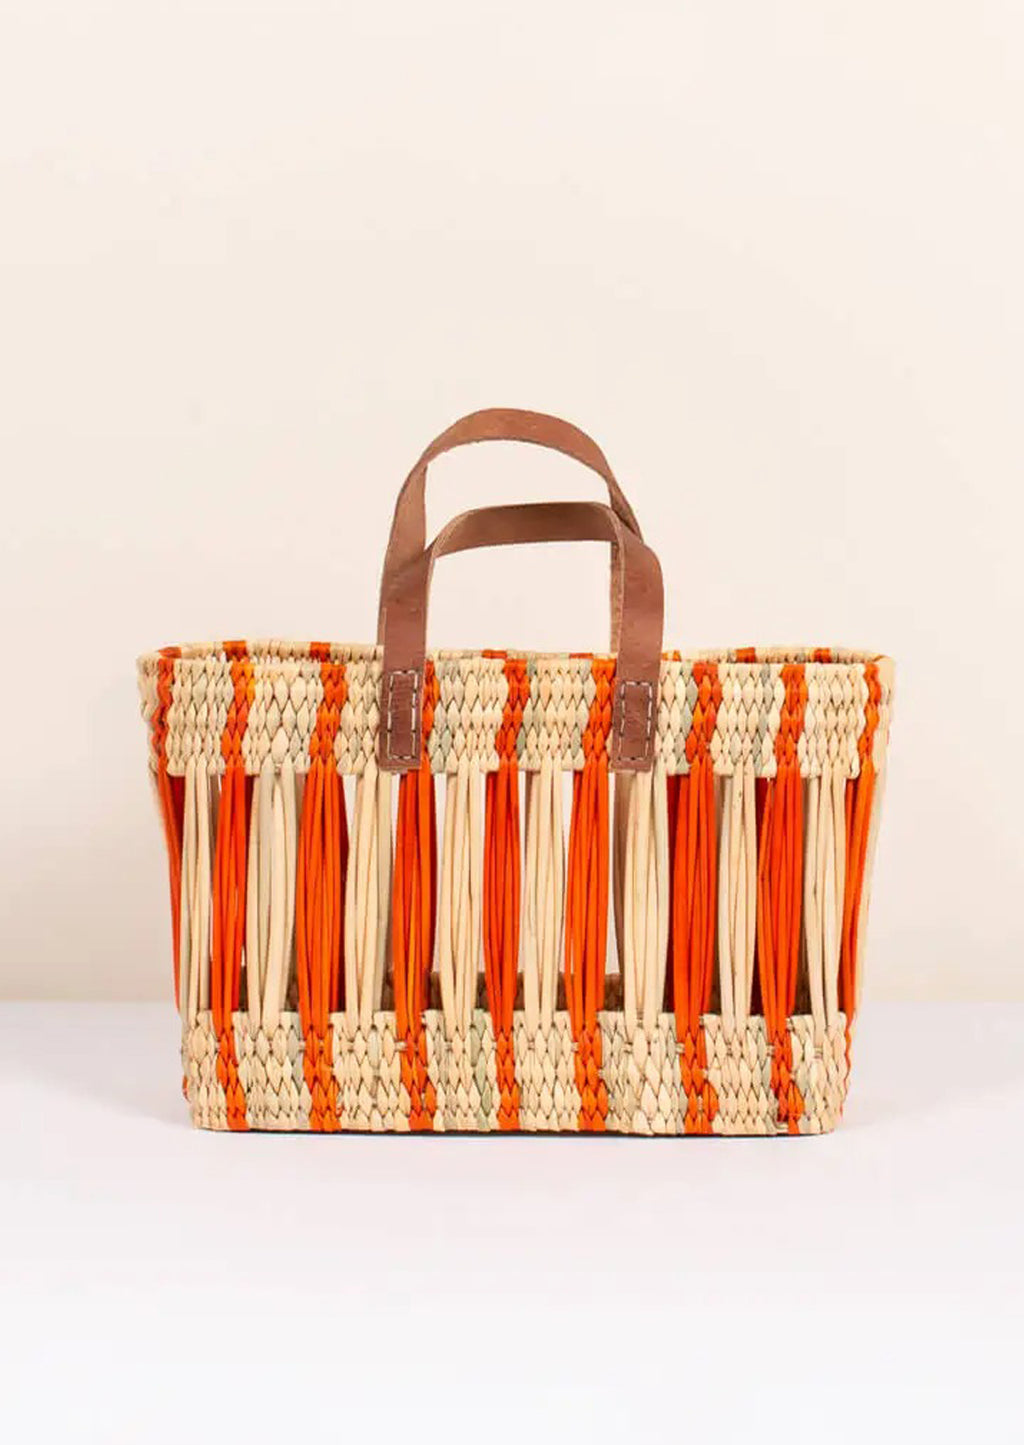 Small / Clementine: An oblong open weave basket in natural reed with bright orange stripes and brown leather handles.